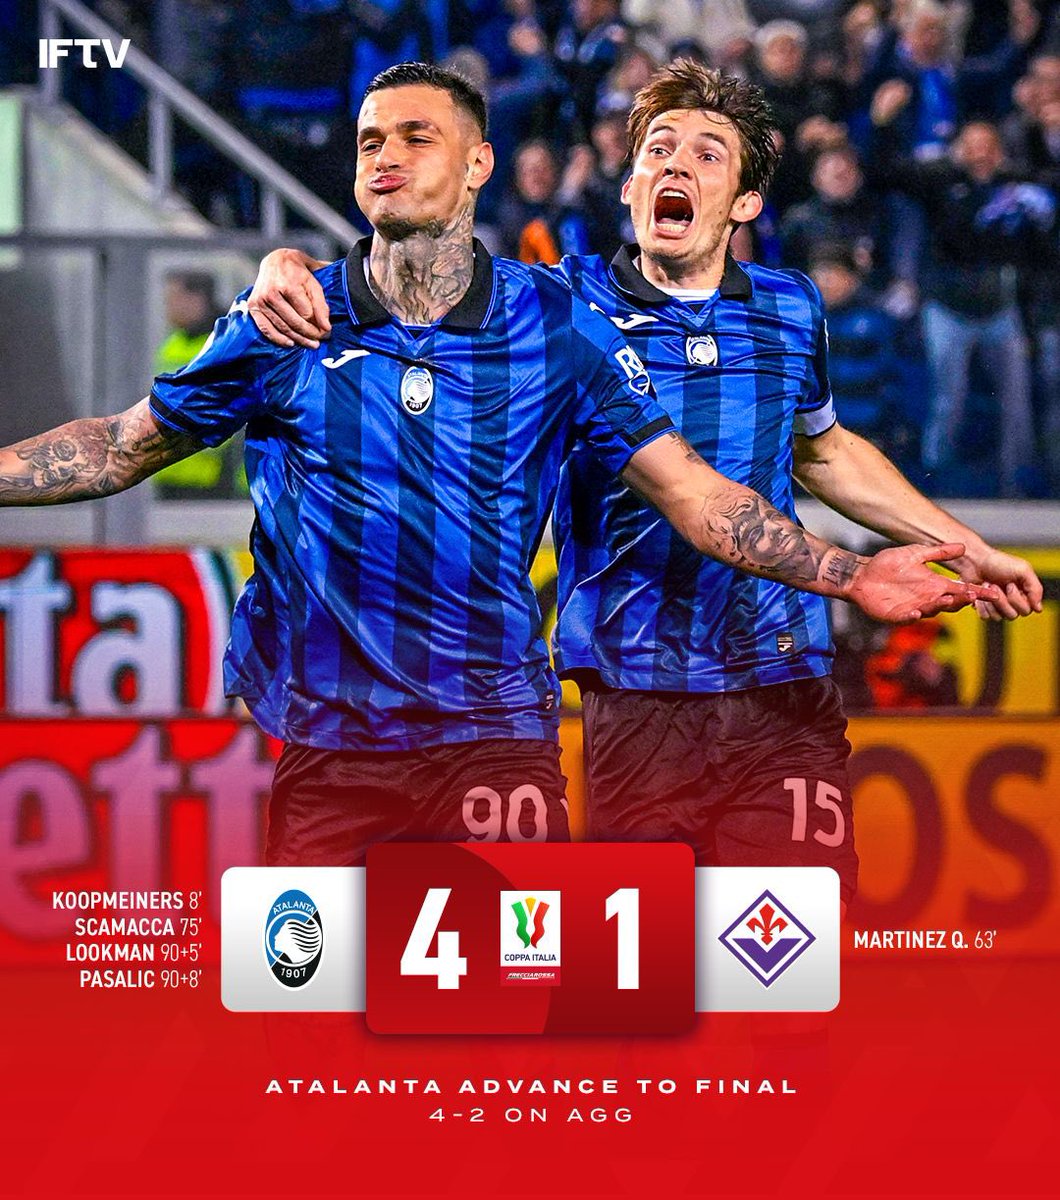 Atalanta have PROGRESSSED to the Coppa Italia FINAL against Juventus 🇮🇹👏 Unfortunately Scamacca will miss the final due to yellow card accumulation.